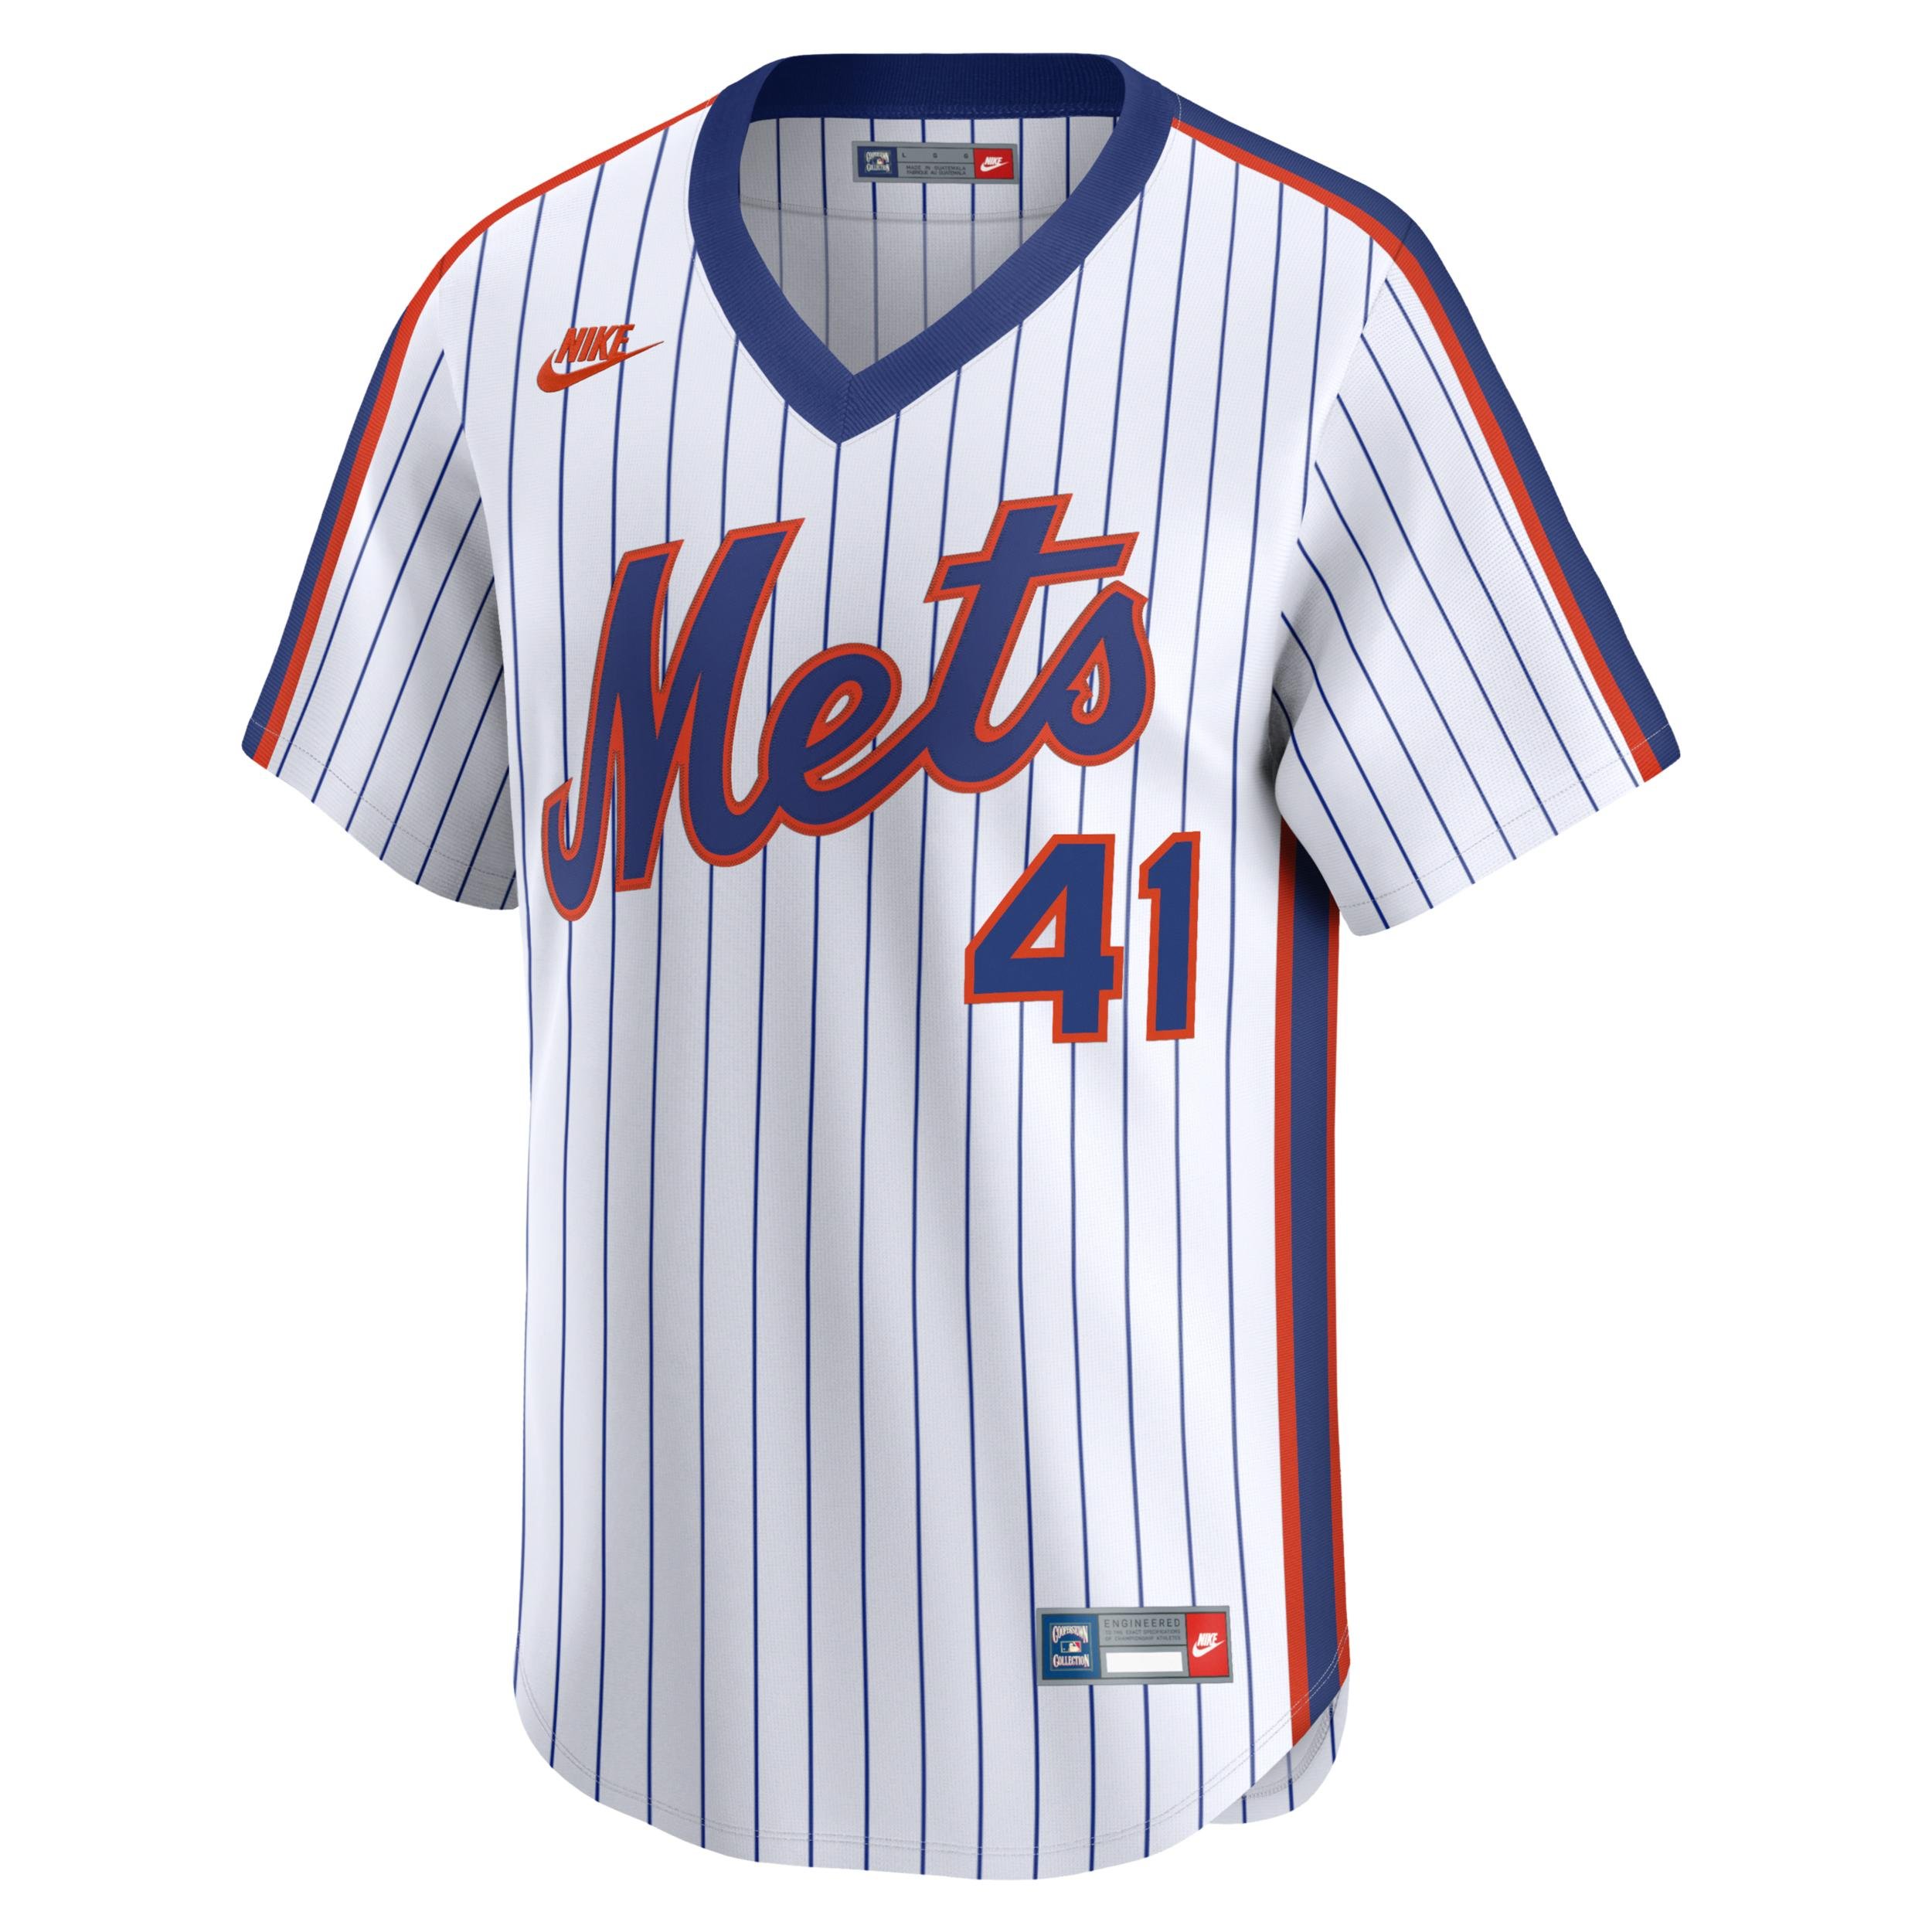 Tom Seaver New York Mets Cooperstown Nike Men's Dri-FIT ADV MLB Limited Jersey by NIKE